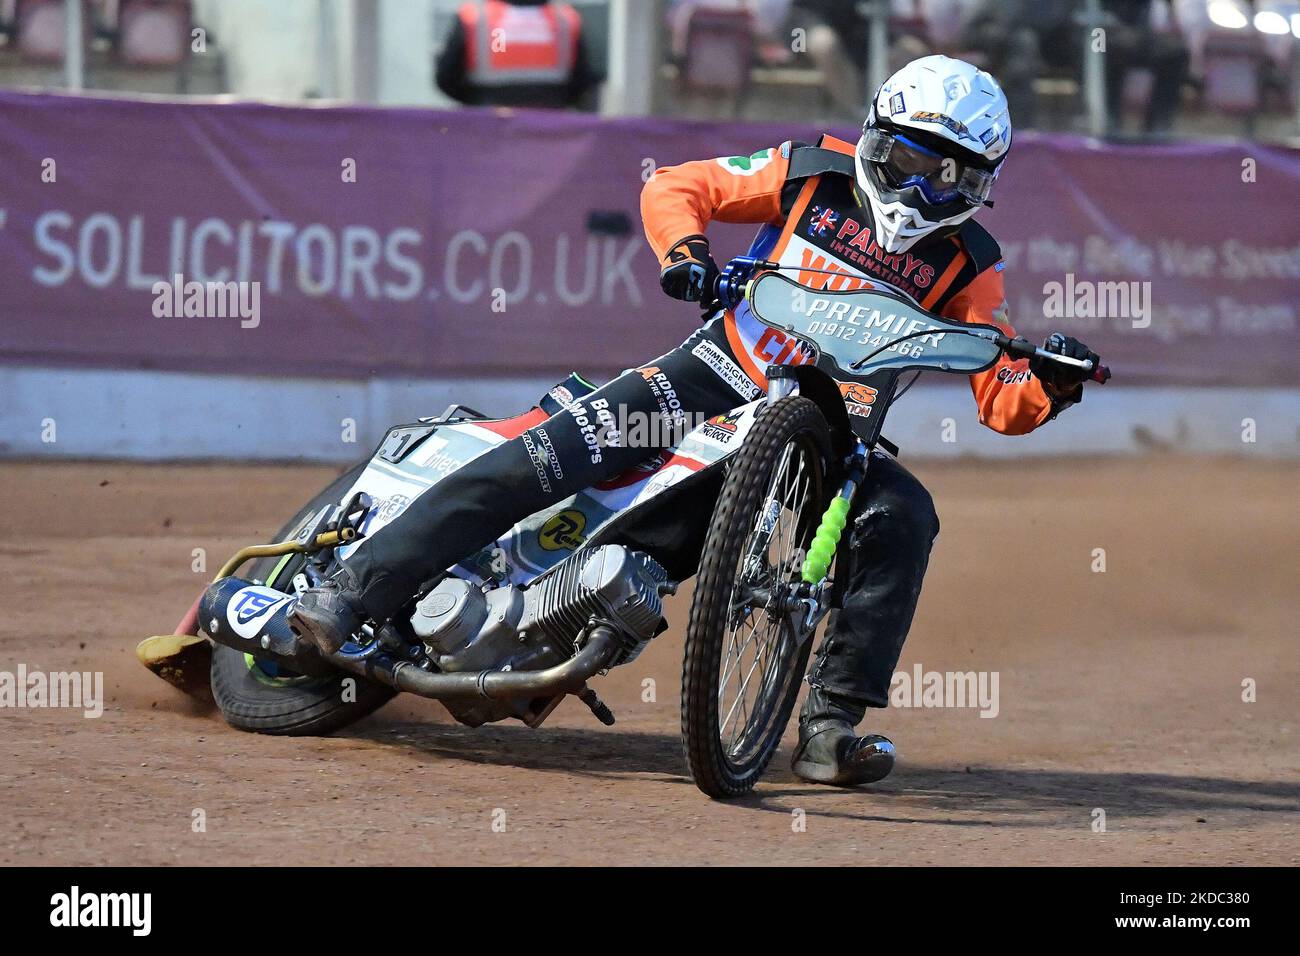 Luke Kileen during the SGB Premiership match between Belle Vue Aces and Wolverhampton Wolves at the National Speedway Stadium, Manchester on Monday 13th June 2022. (Photo by Eddie Garvey/MI News/NurPhoto) Stock Photo